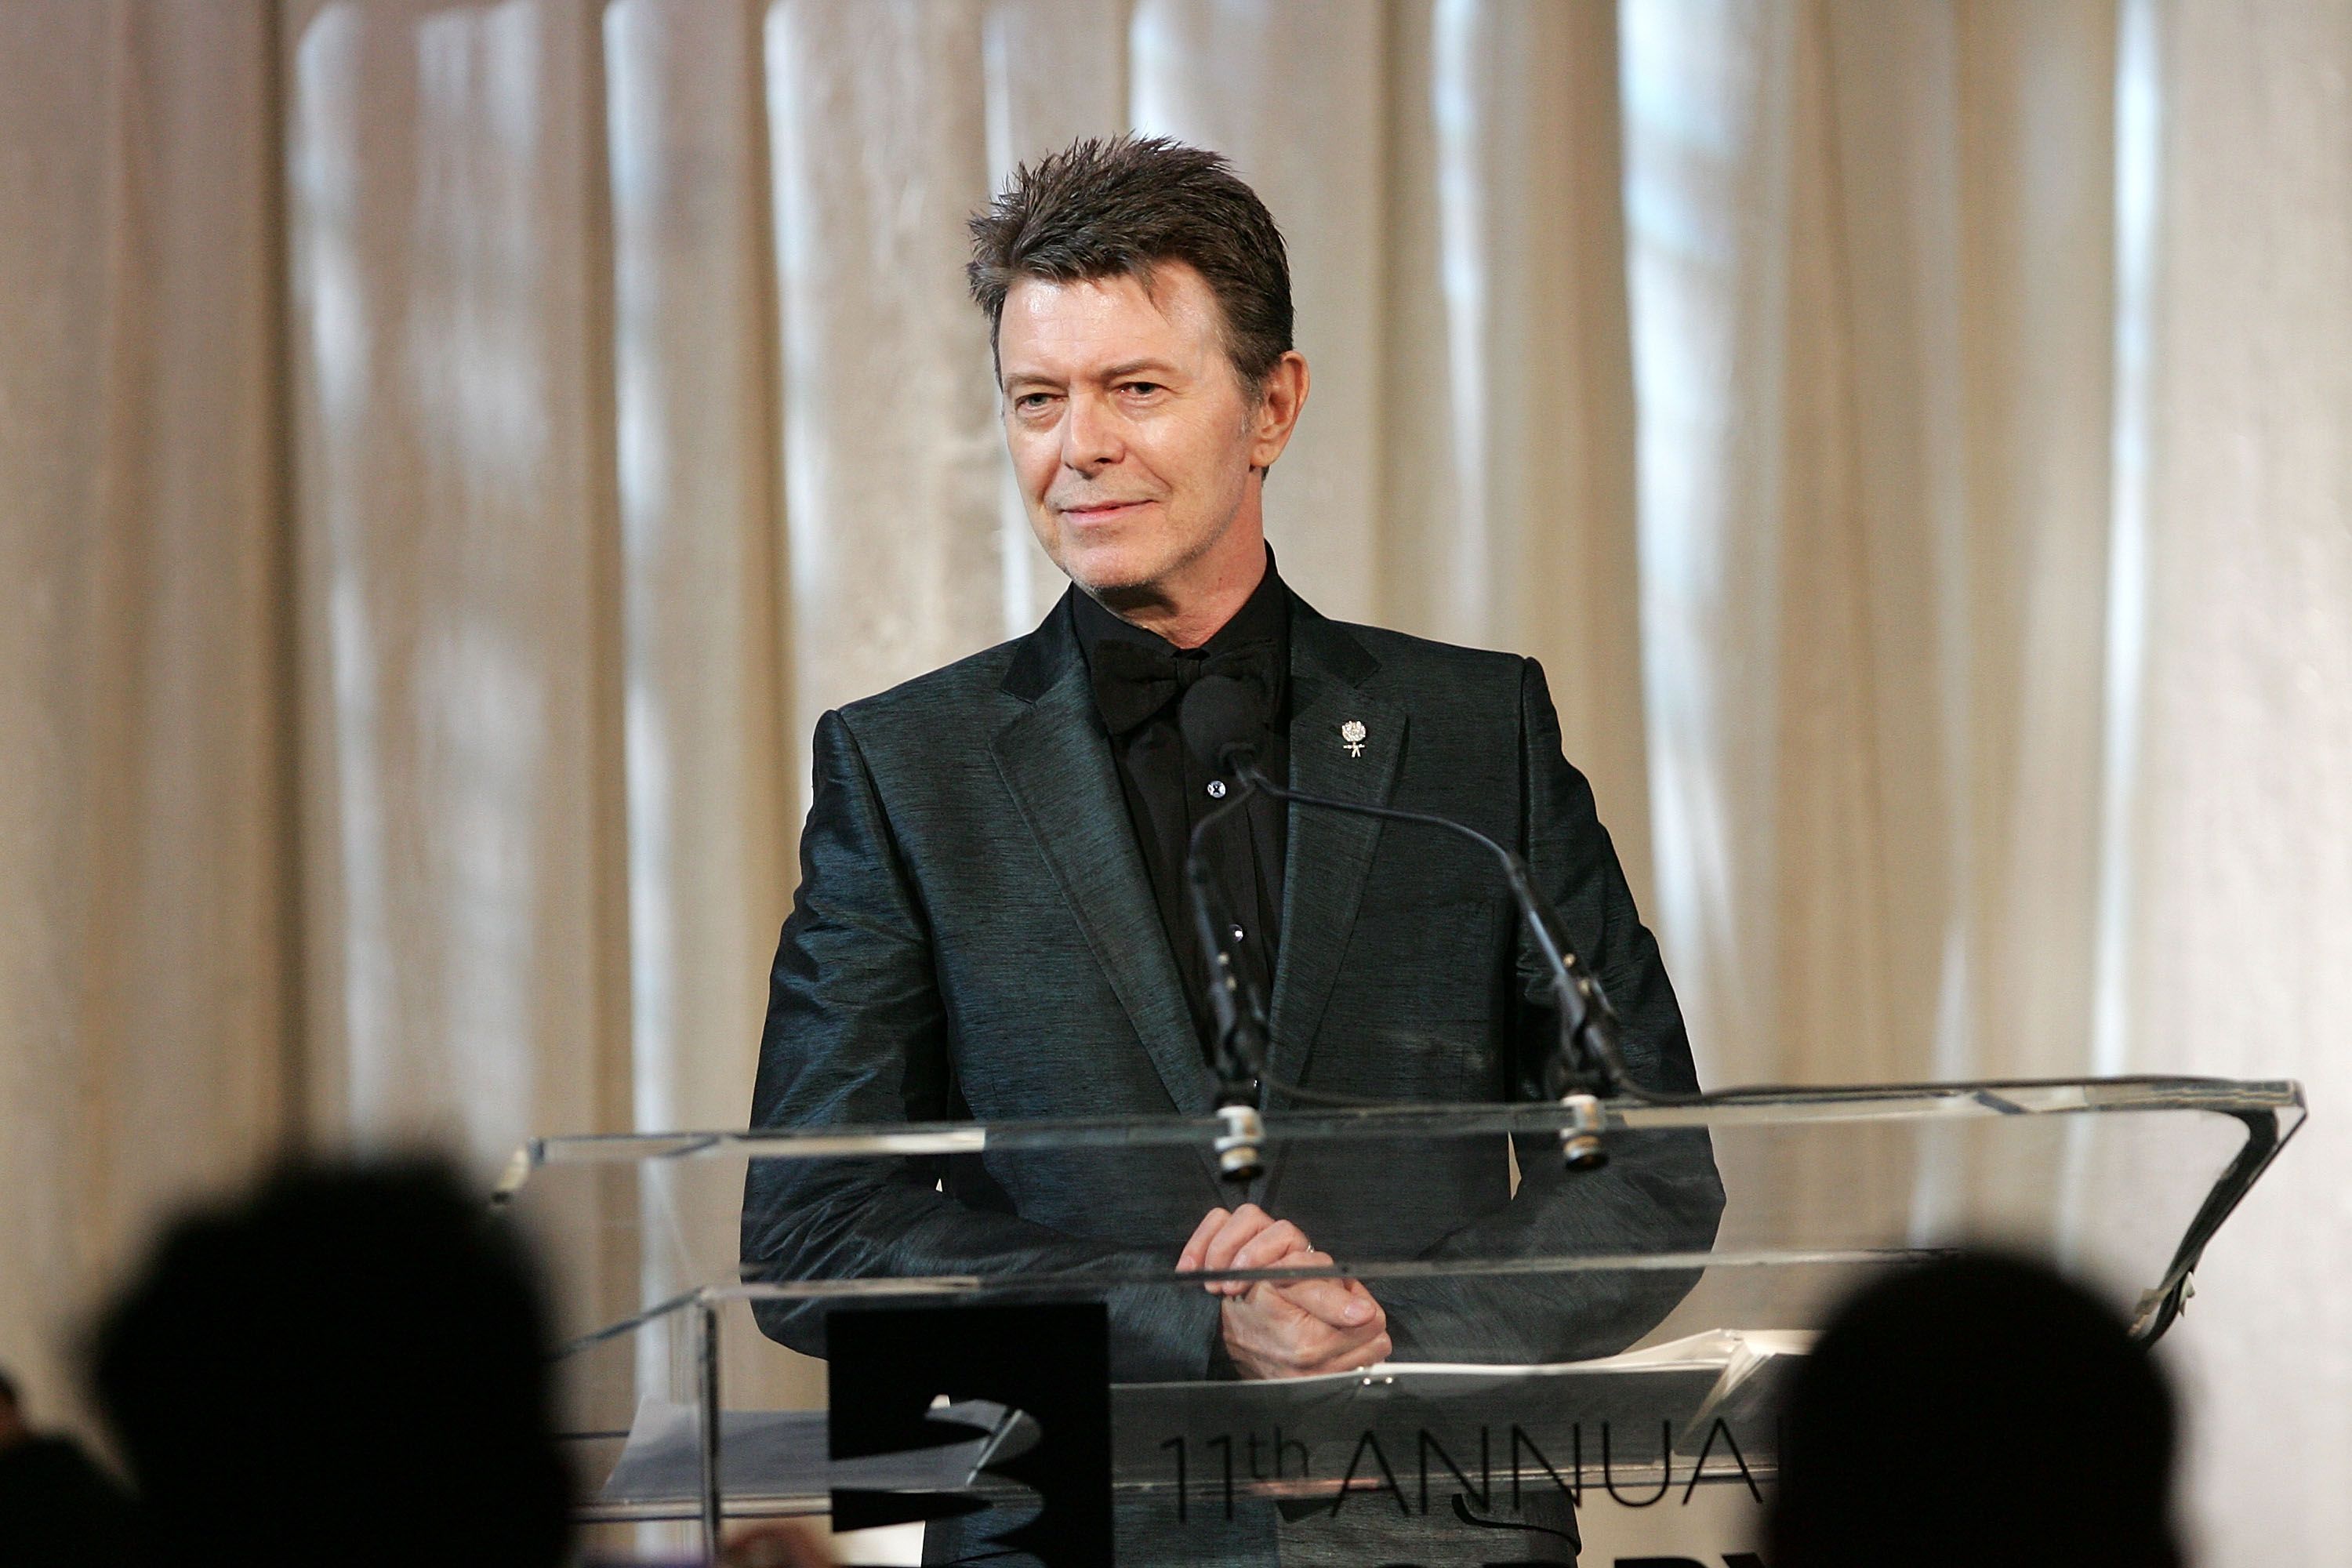 David Bowie at the Webby Lifetime Achievement award on June 5, 2007 in New York City. | Photo: Getty Images